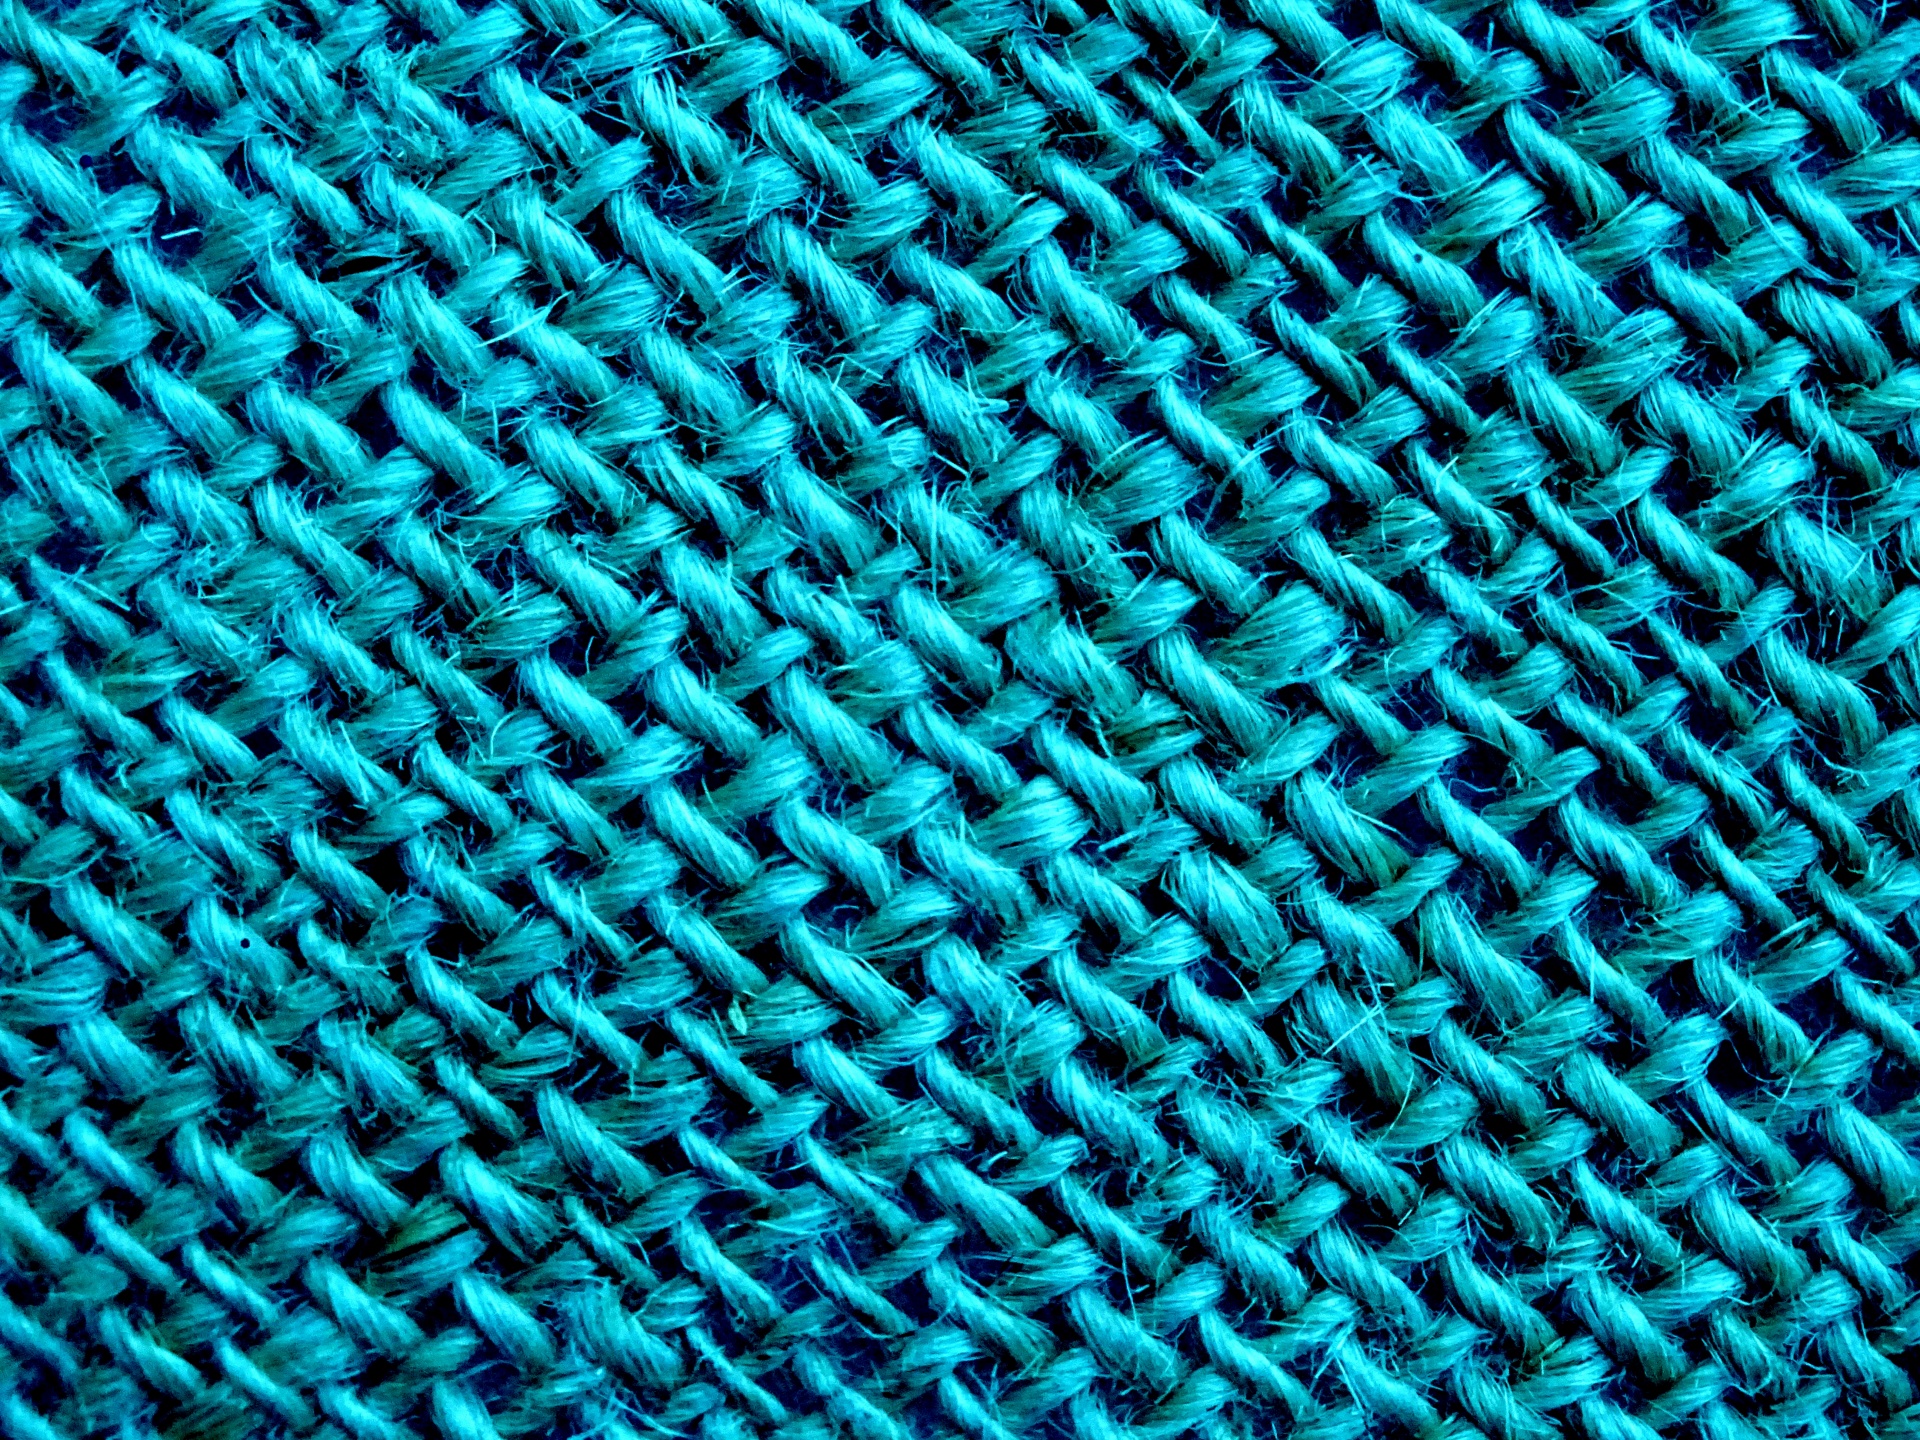 Turquoise Woven Twine Background